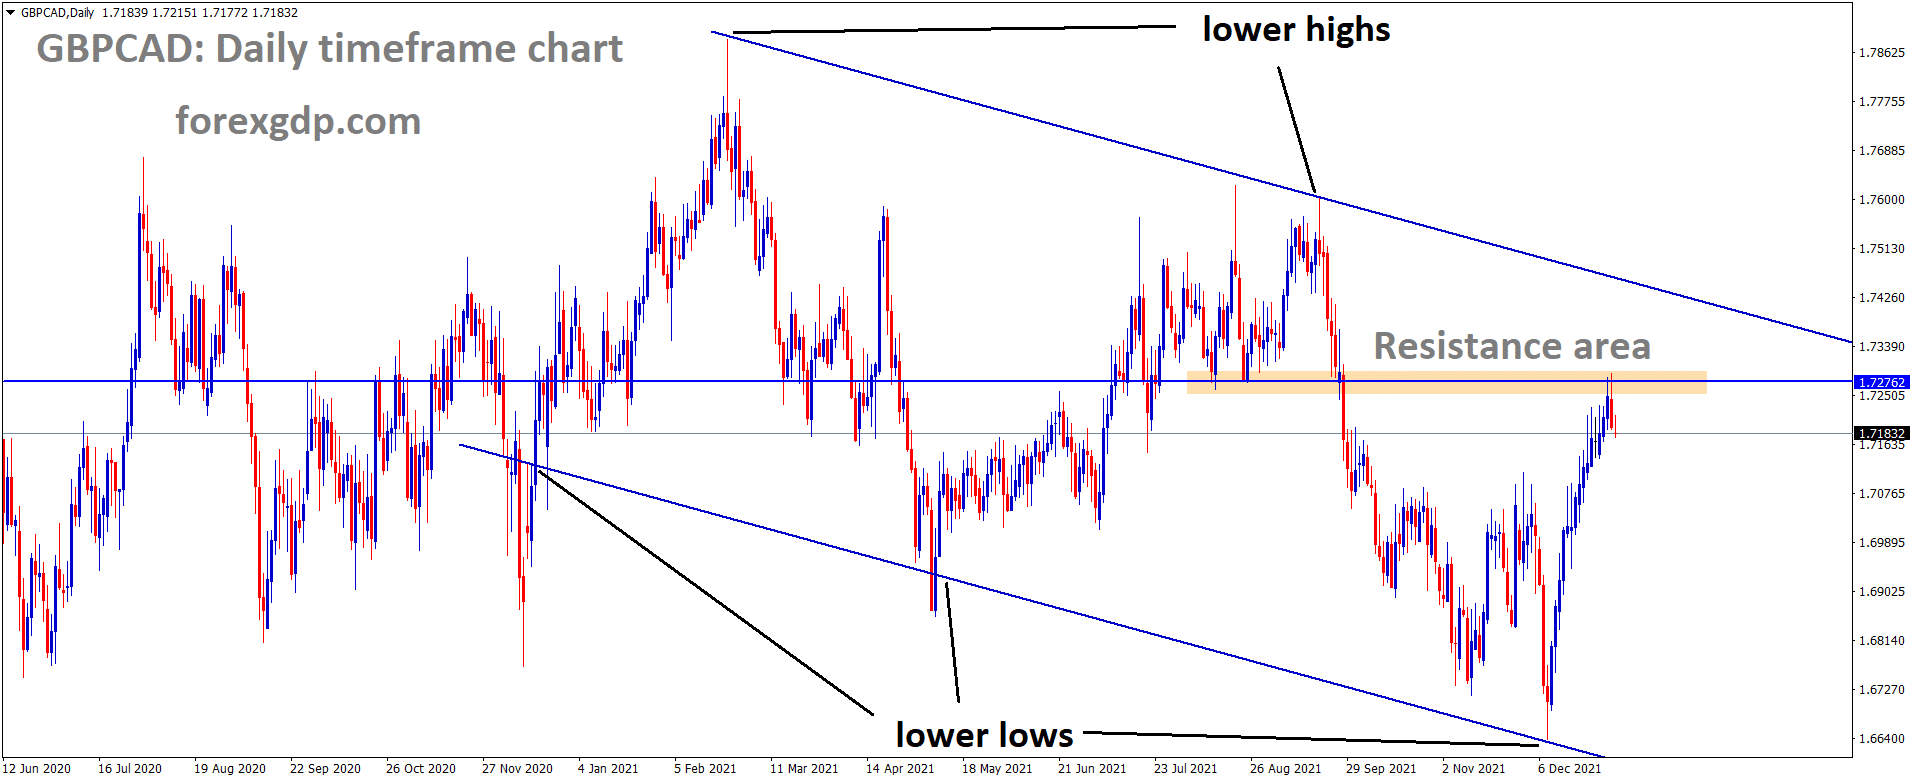 GBPCAD is moving in the Descending channel and the market has fallen from the horizontal resistance area 1